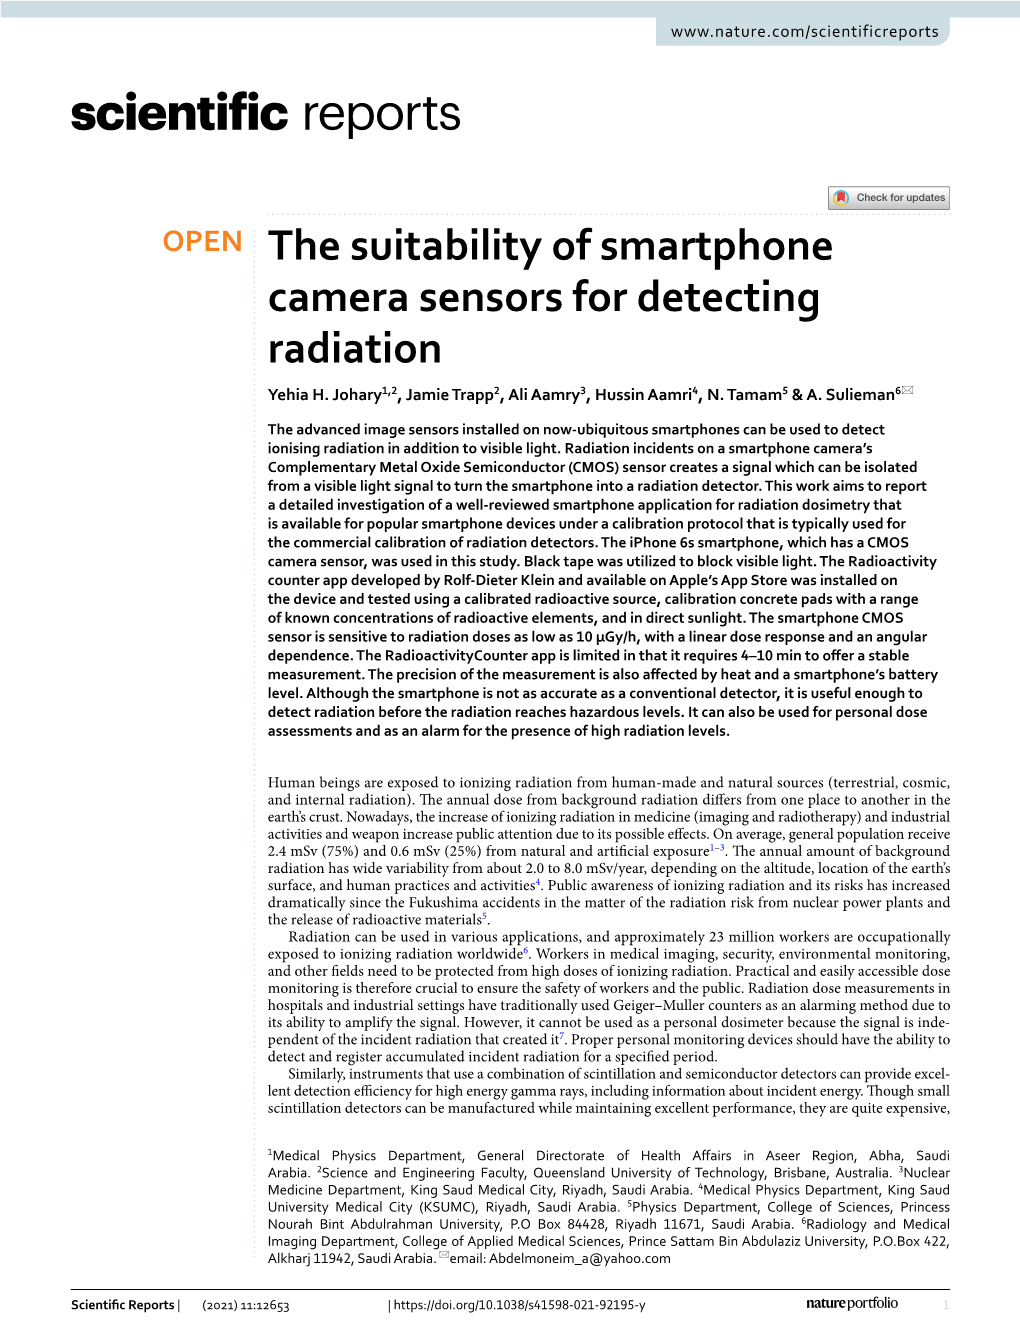 The Suitability of Smartphone Camera Sensors for Detecting Radiation Yehia H